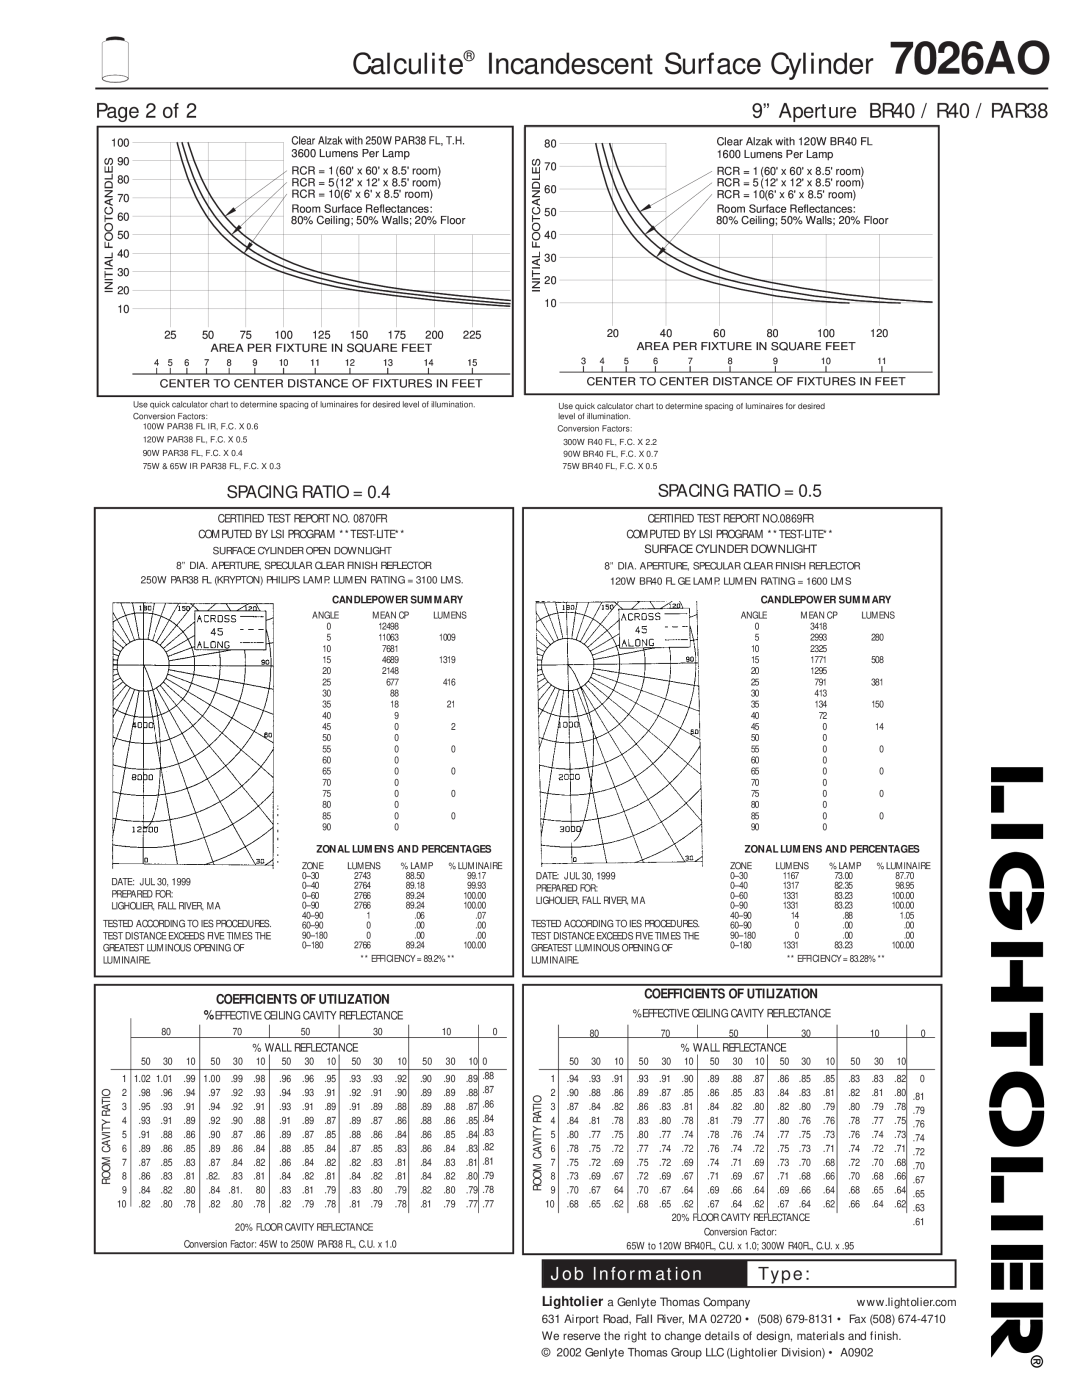 Lightolier 7026AO Calculite Incandescent Surface Cylinder, 9” Aperture, Spacing Ratio =, Page 2 of, BR40 / R40 / PAR38 